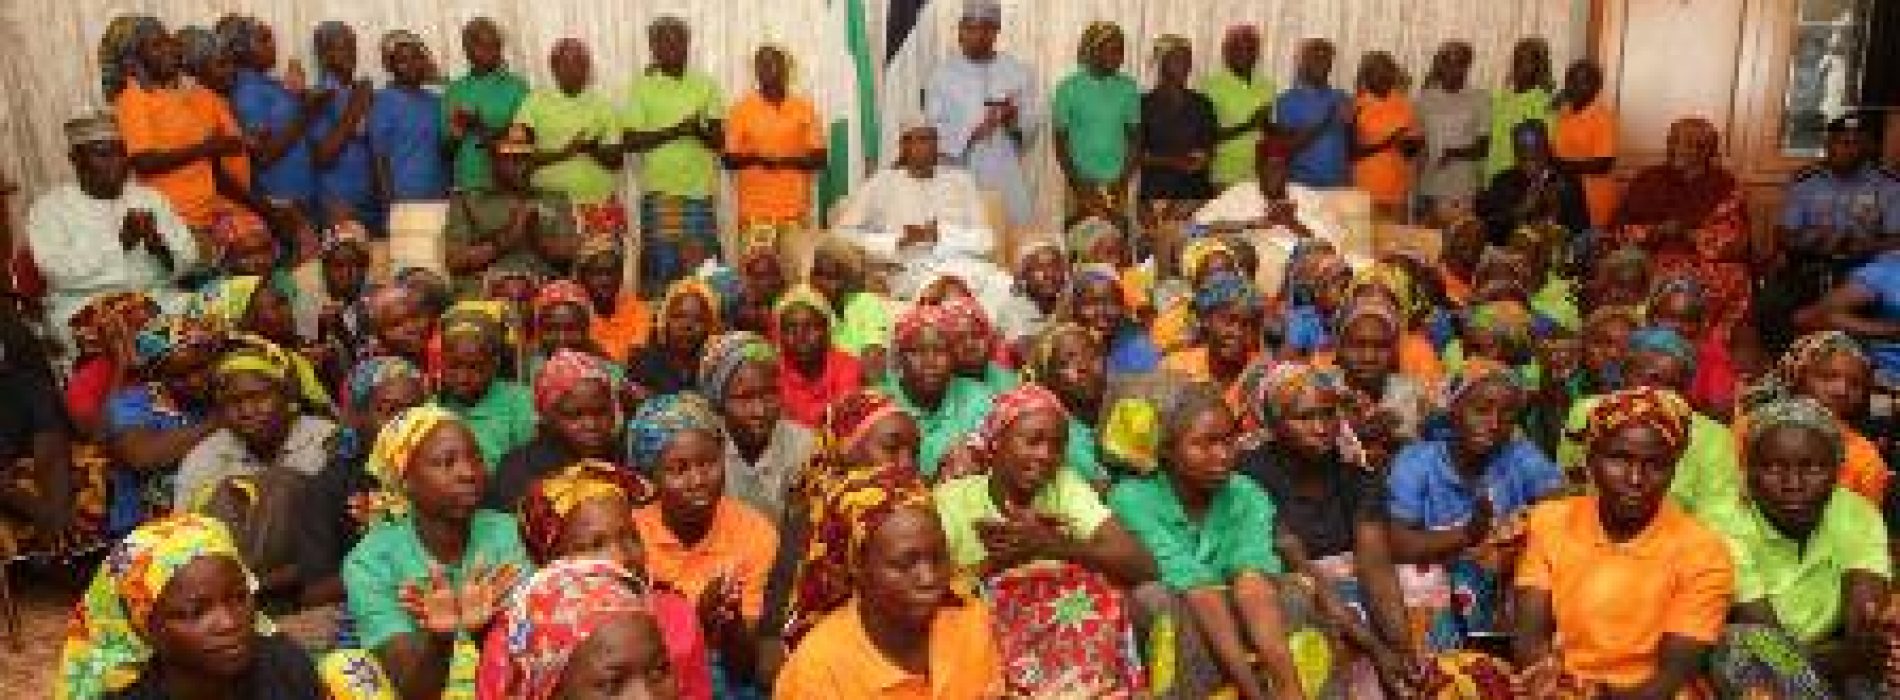 Buhari directs best care for released Chibok girls – Minister 